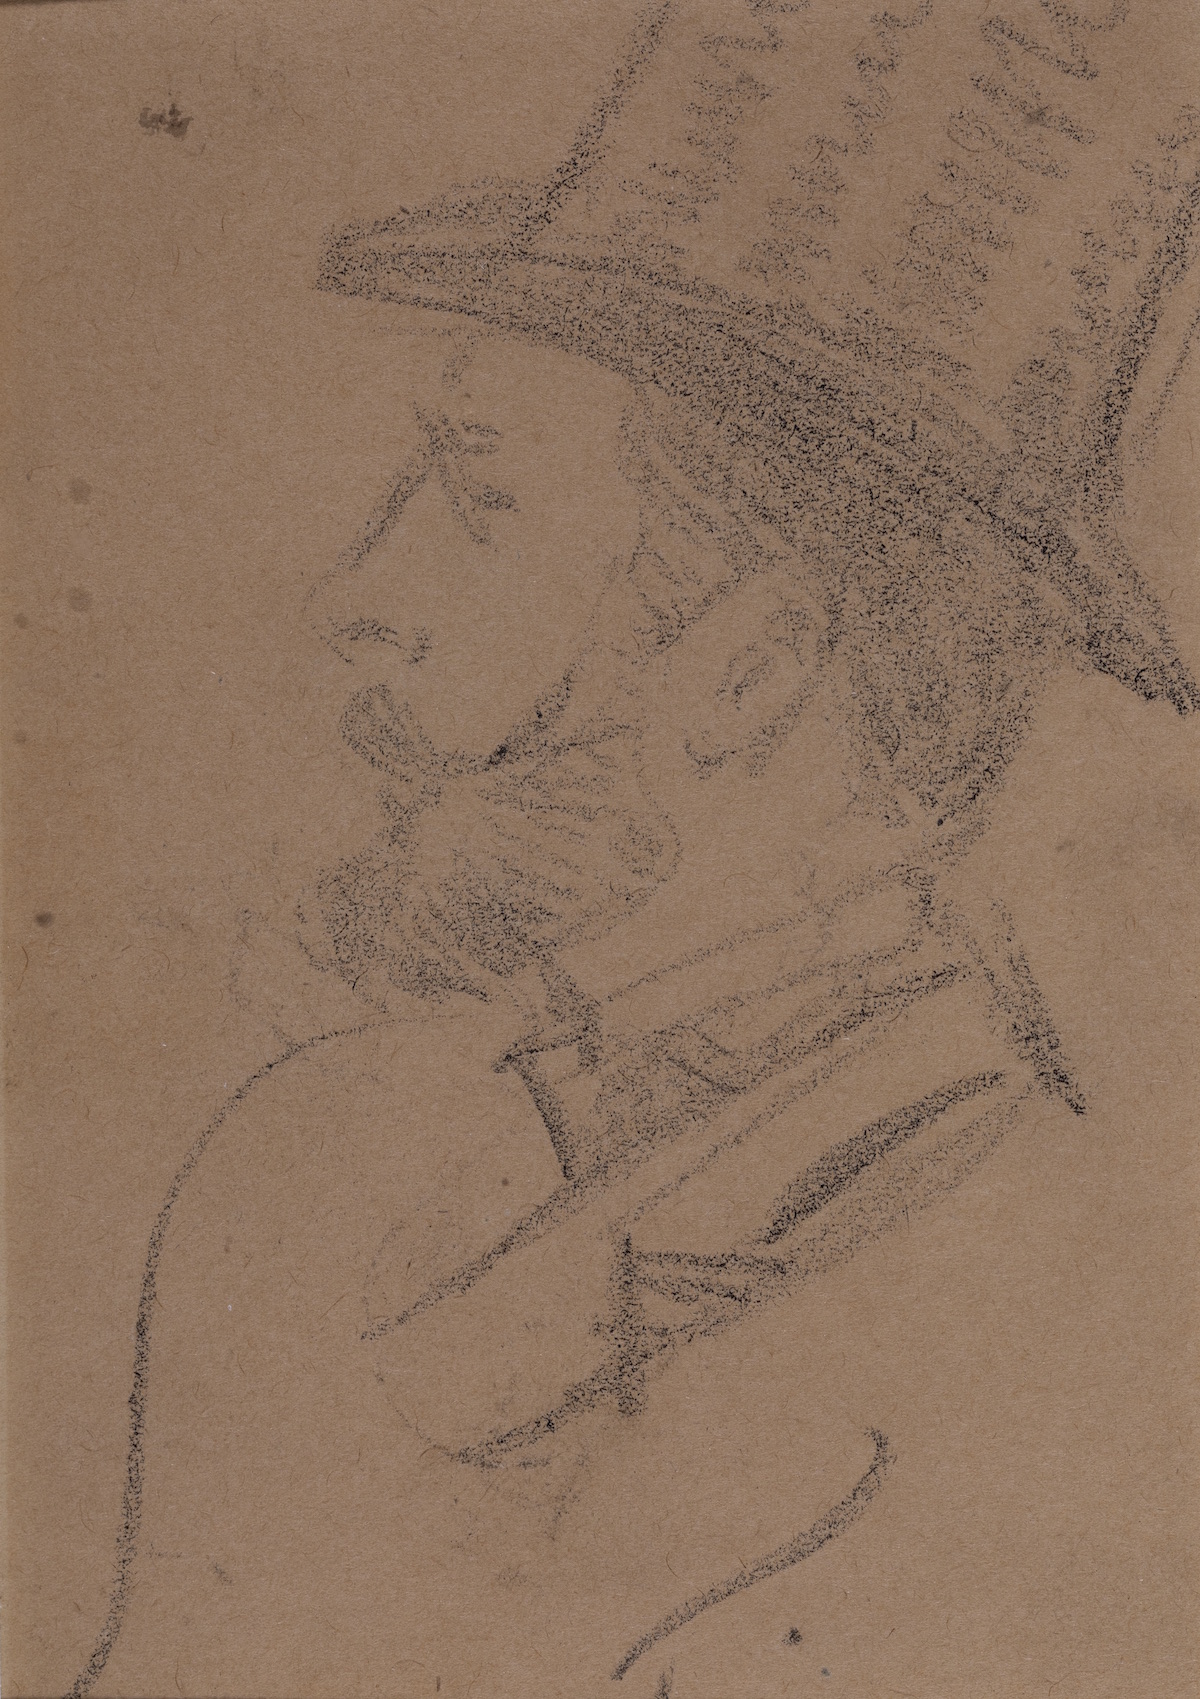 Profile view of the head and shoulders of a man in a top hat